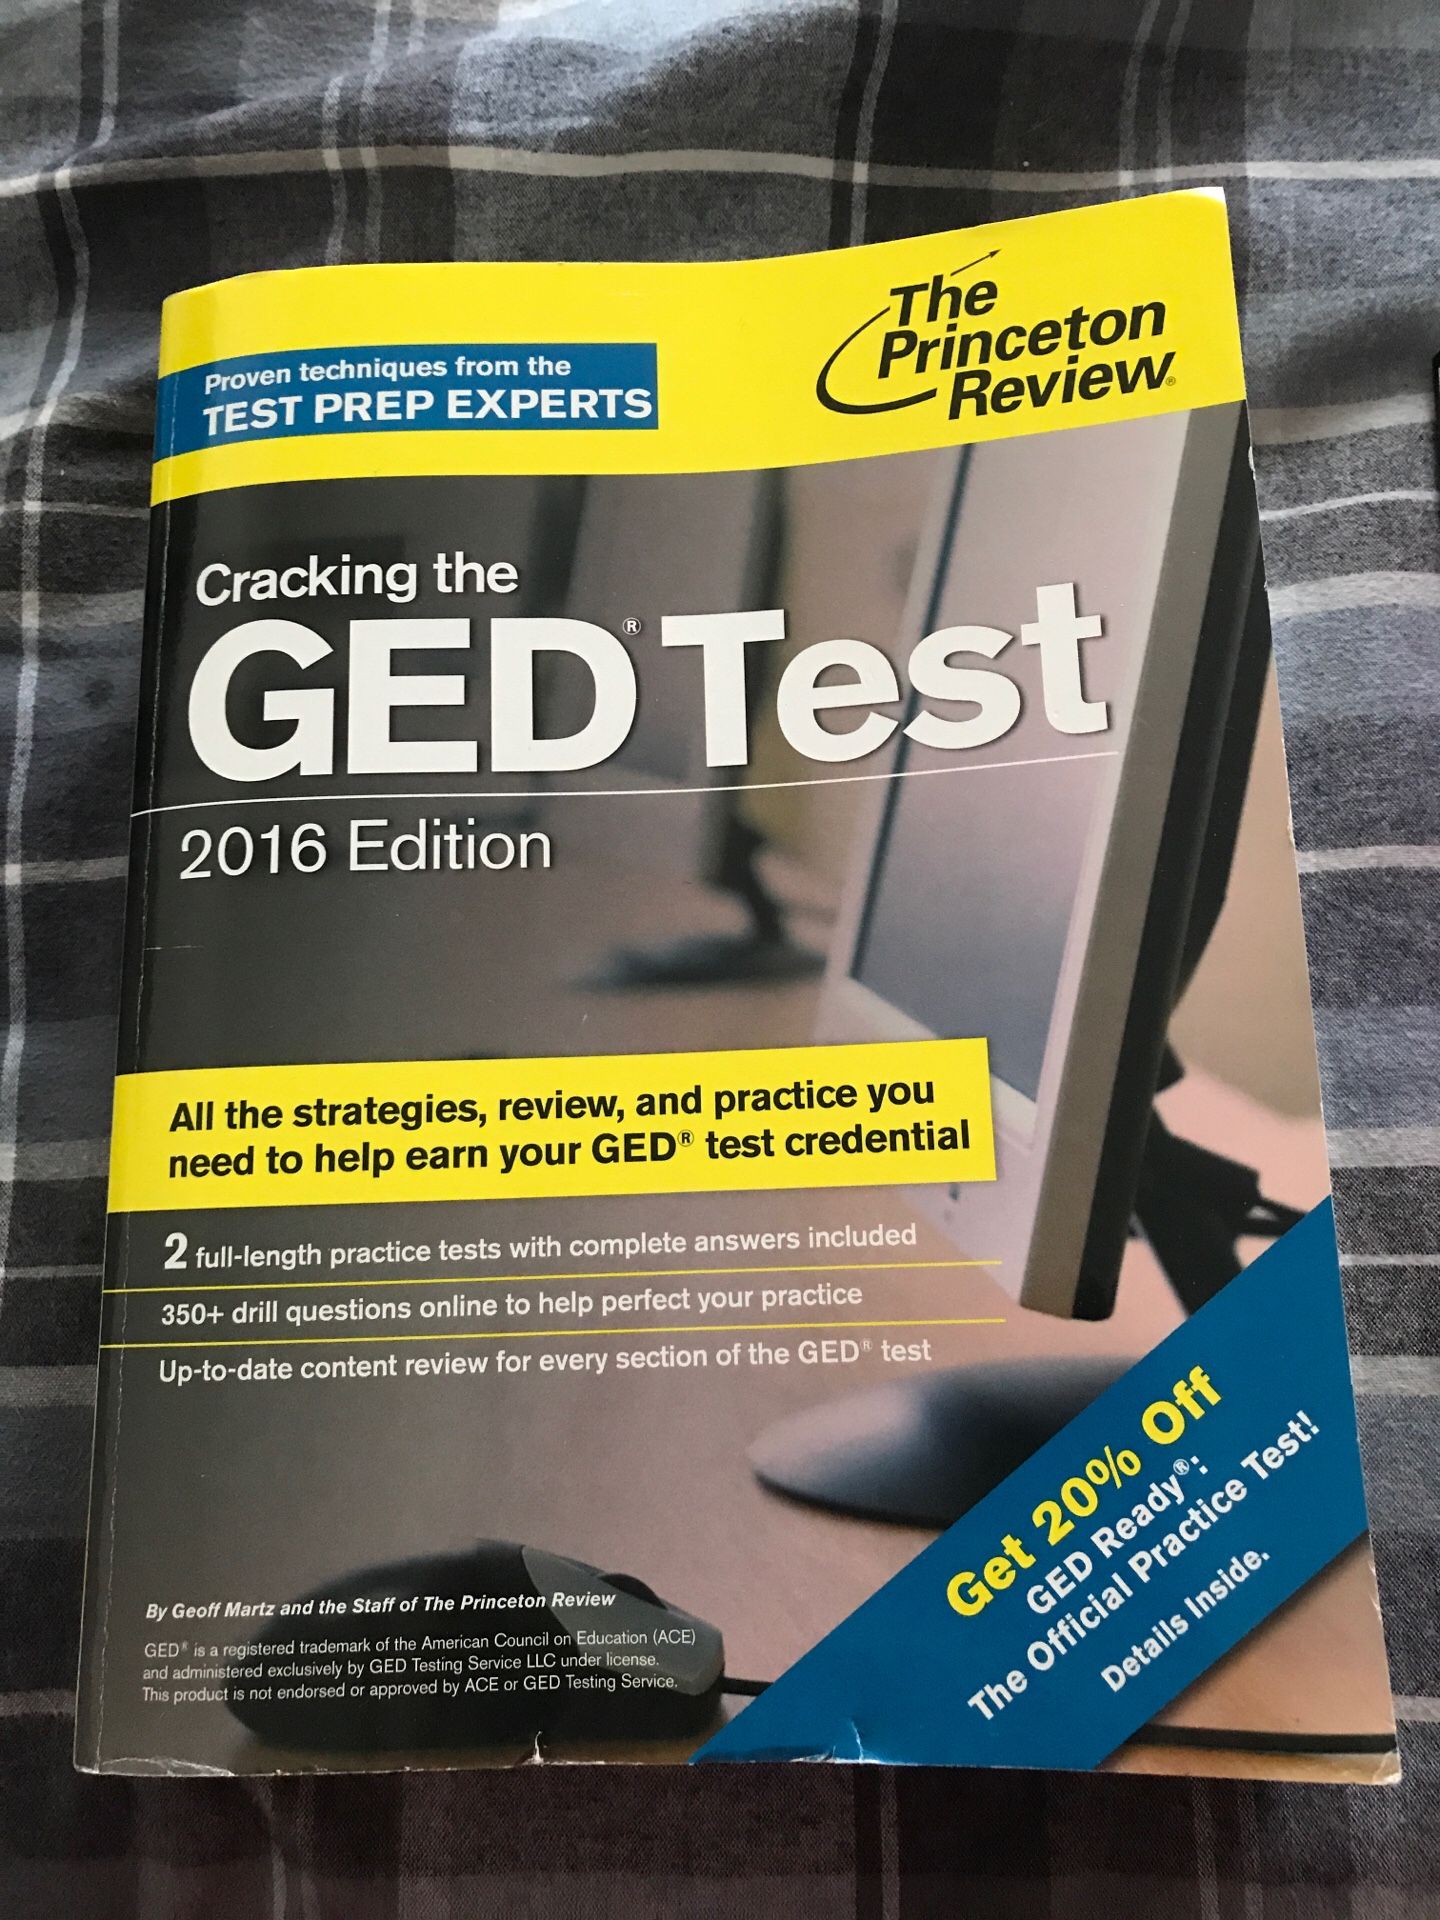 GED TEST study and preparation booklet.